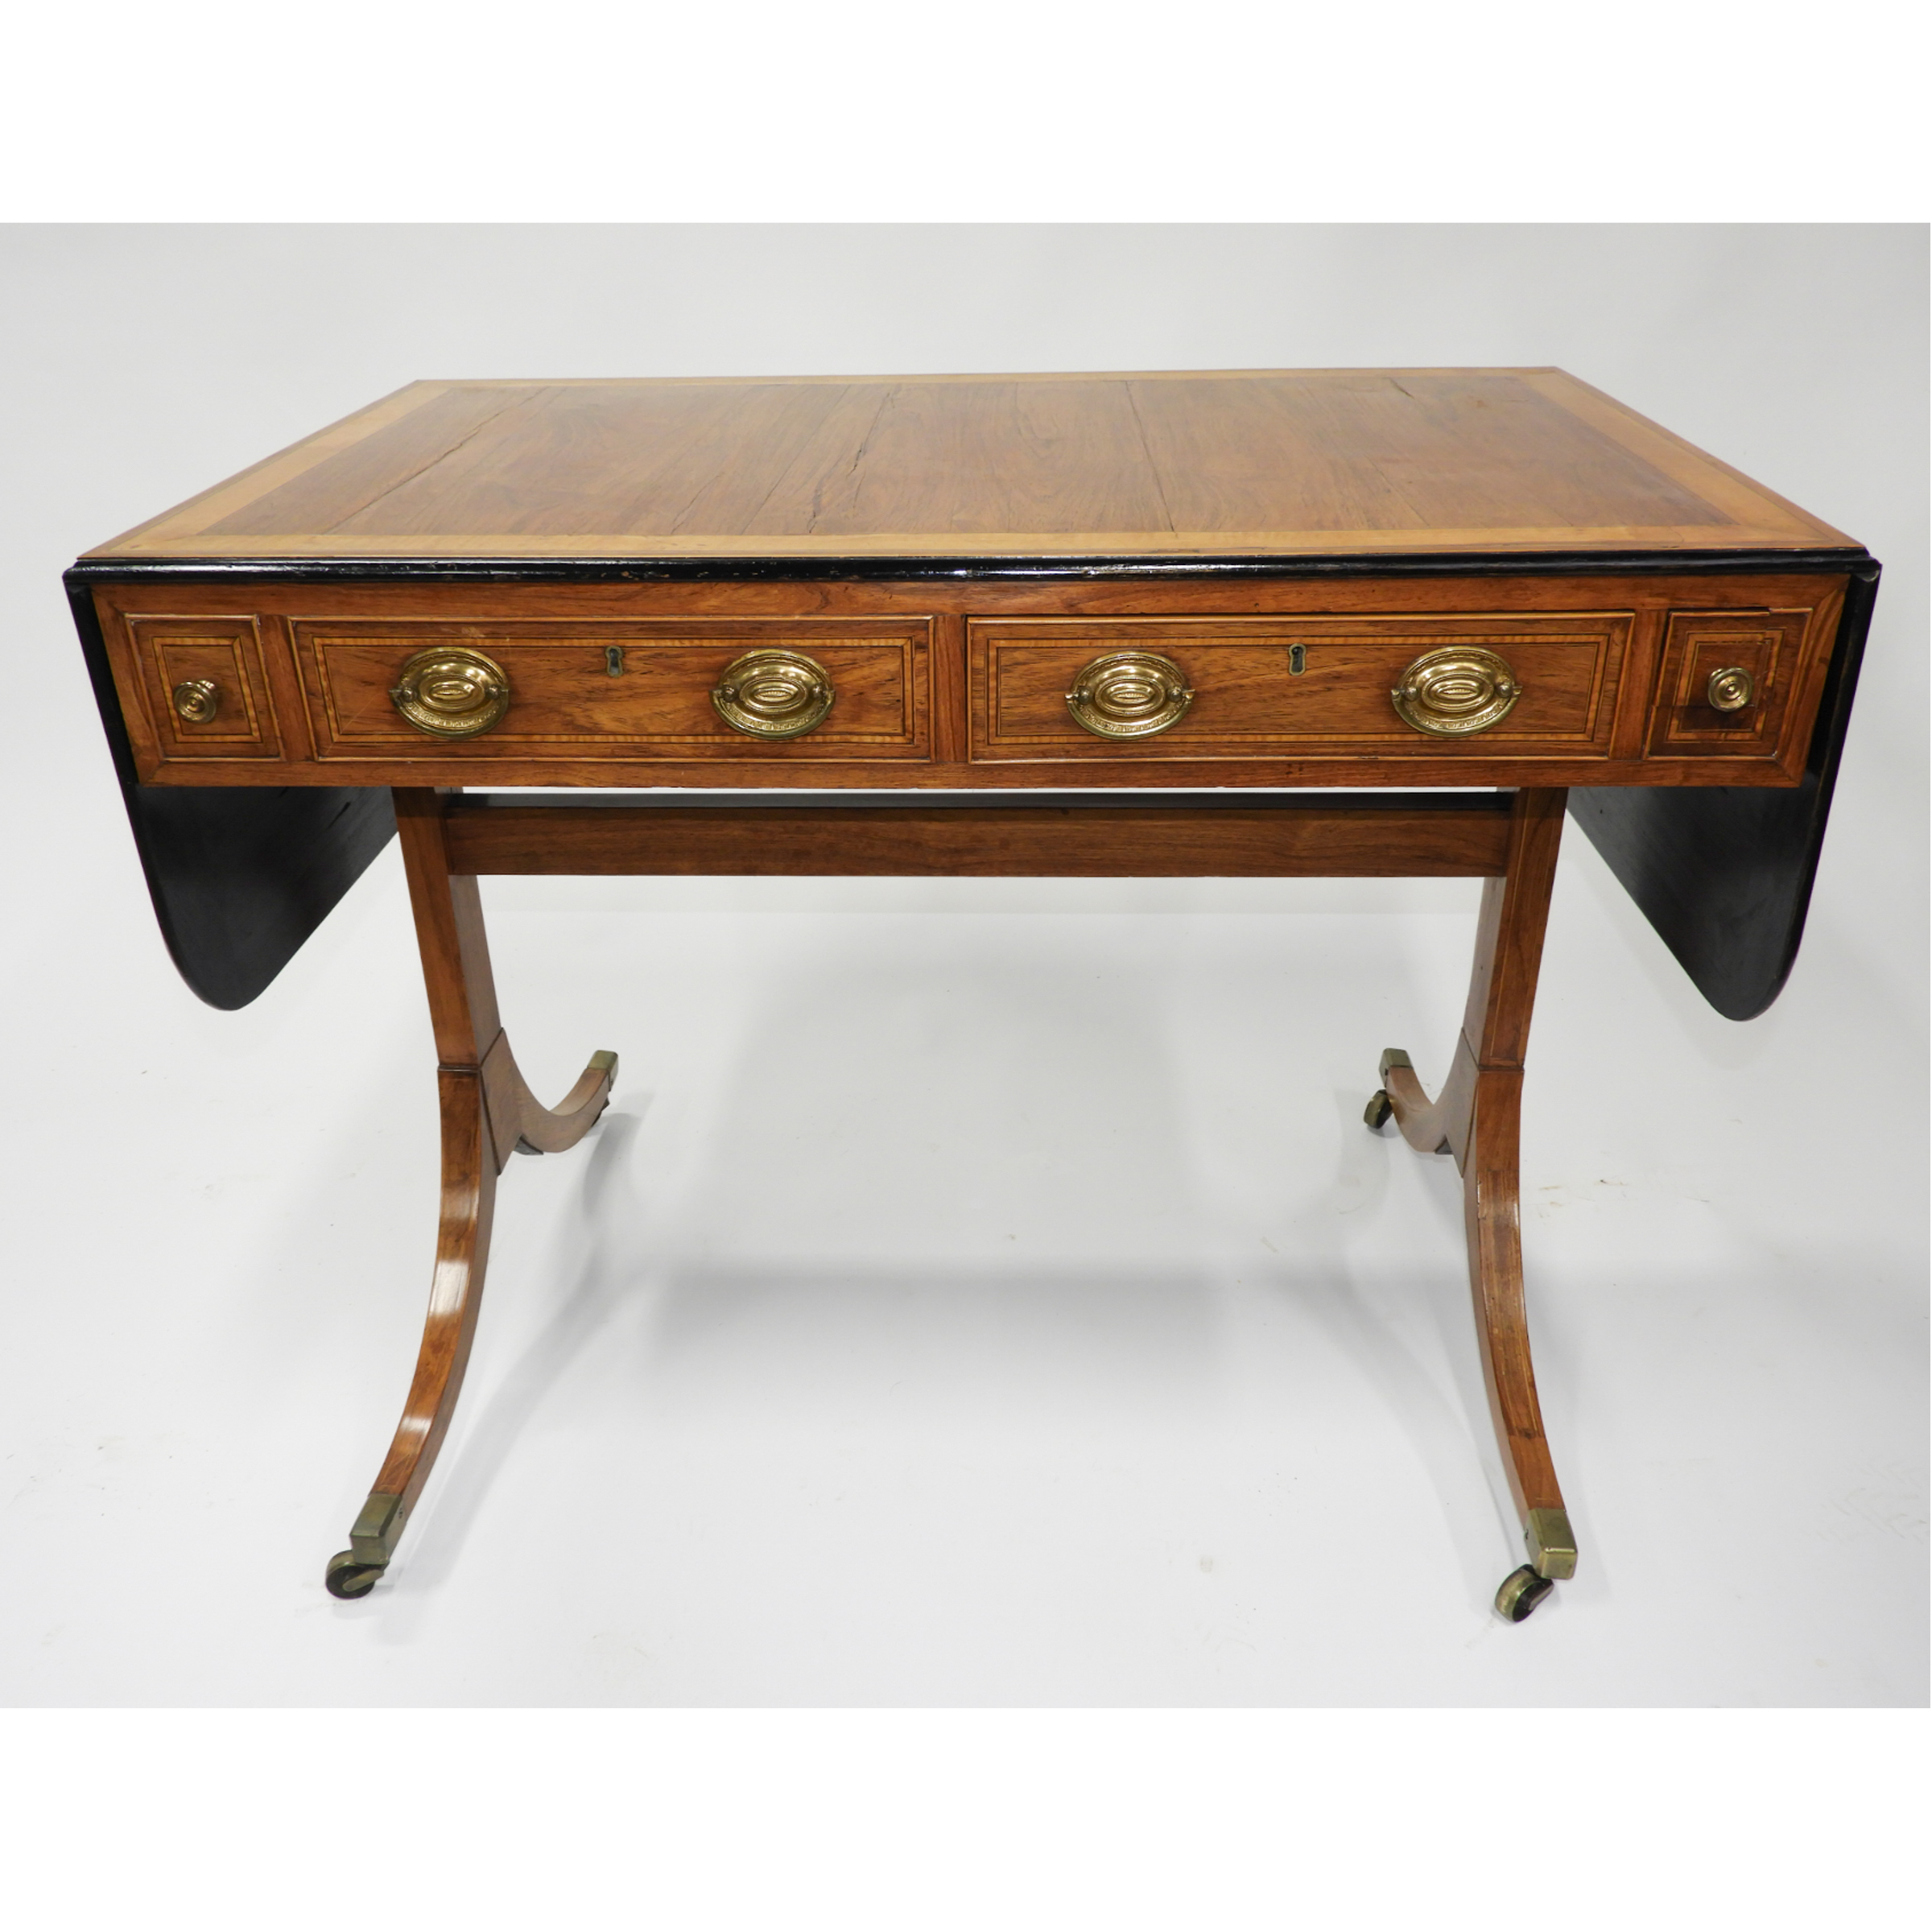 Regency Rosewood Crossbanded Sofa Table, early 19th century